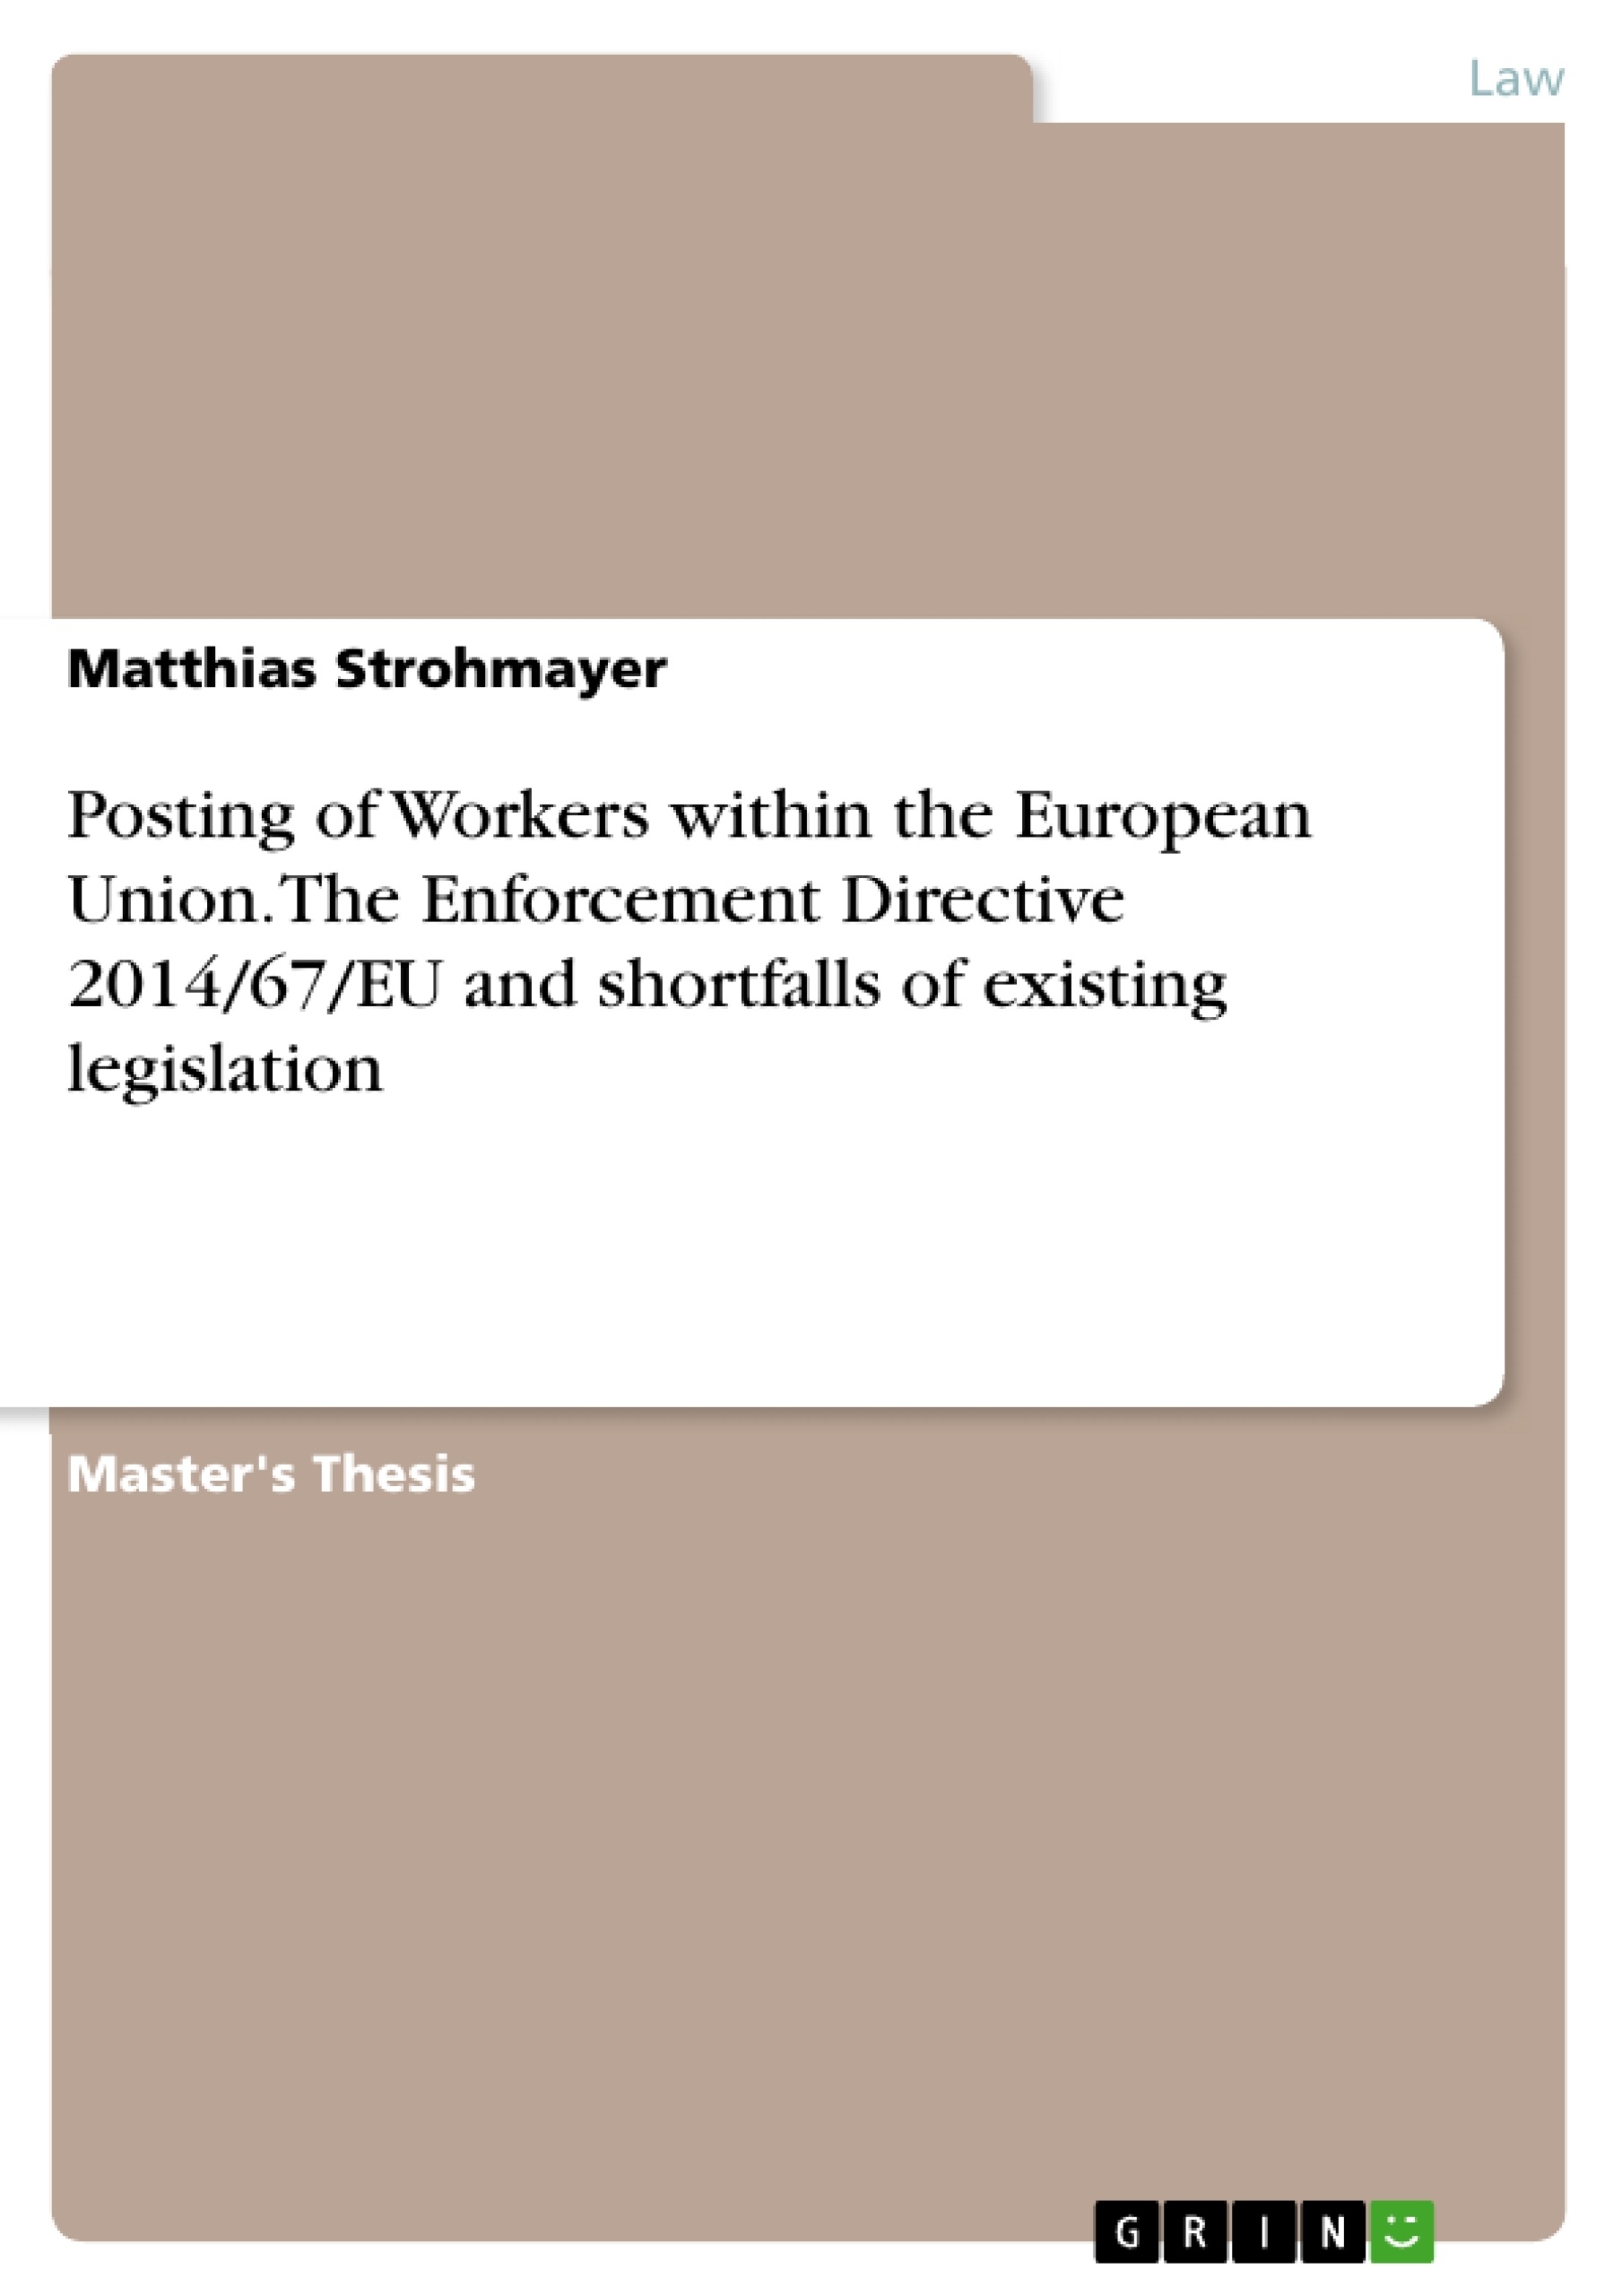 Title: Posting of Workers within the European Union. The Enforcement Directive 2014/67/EU and shortfalls of existing legislation